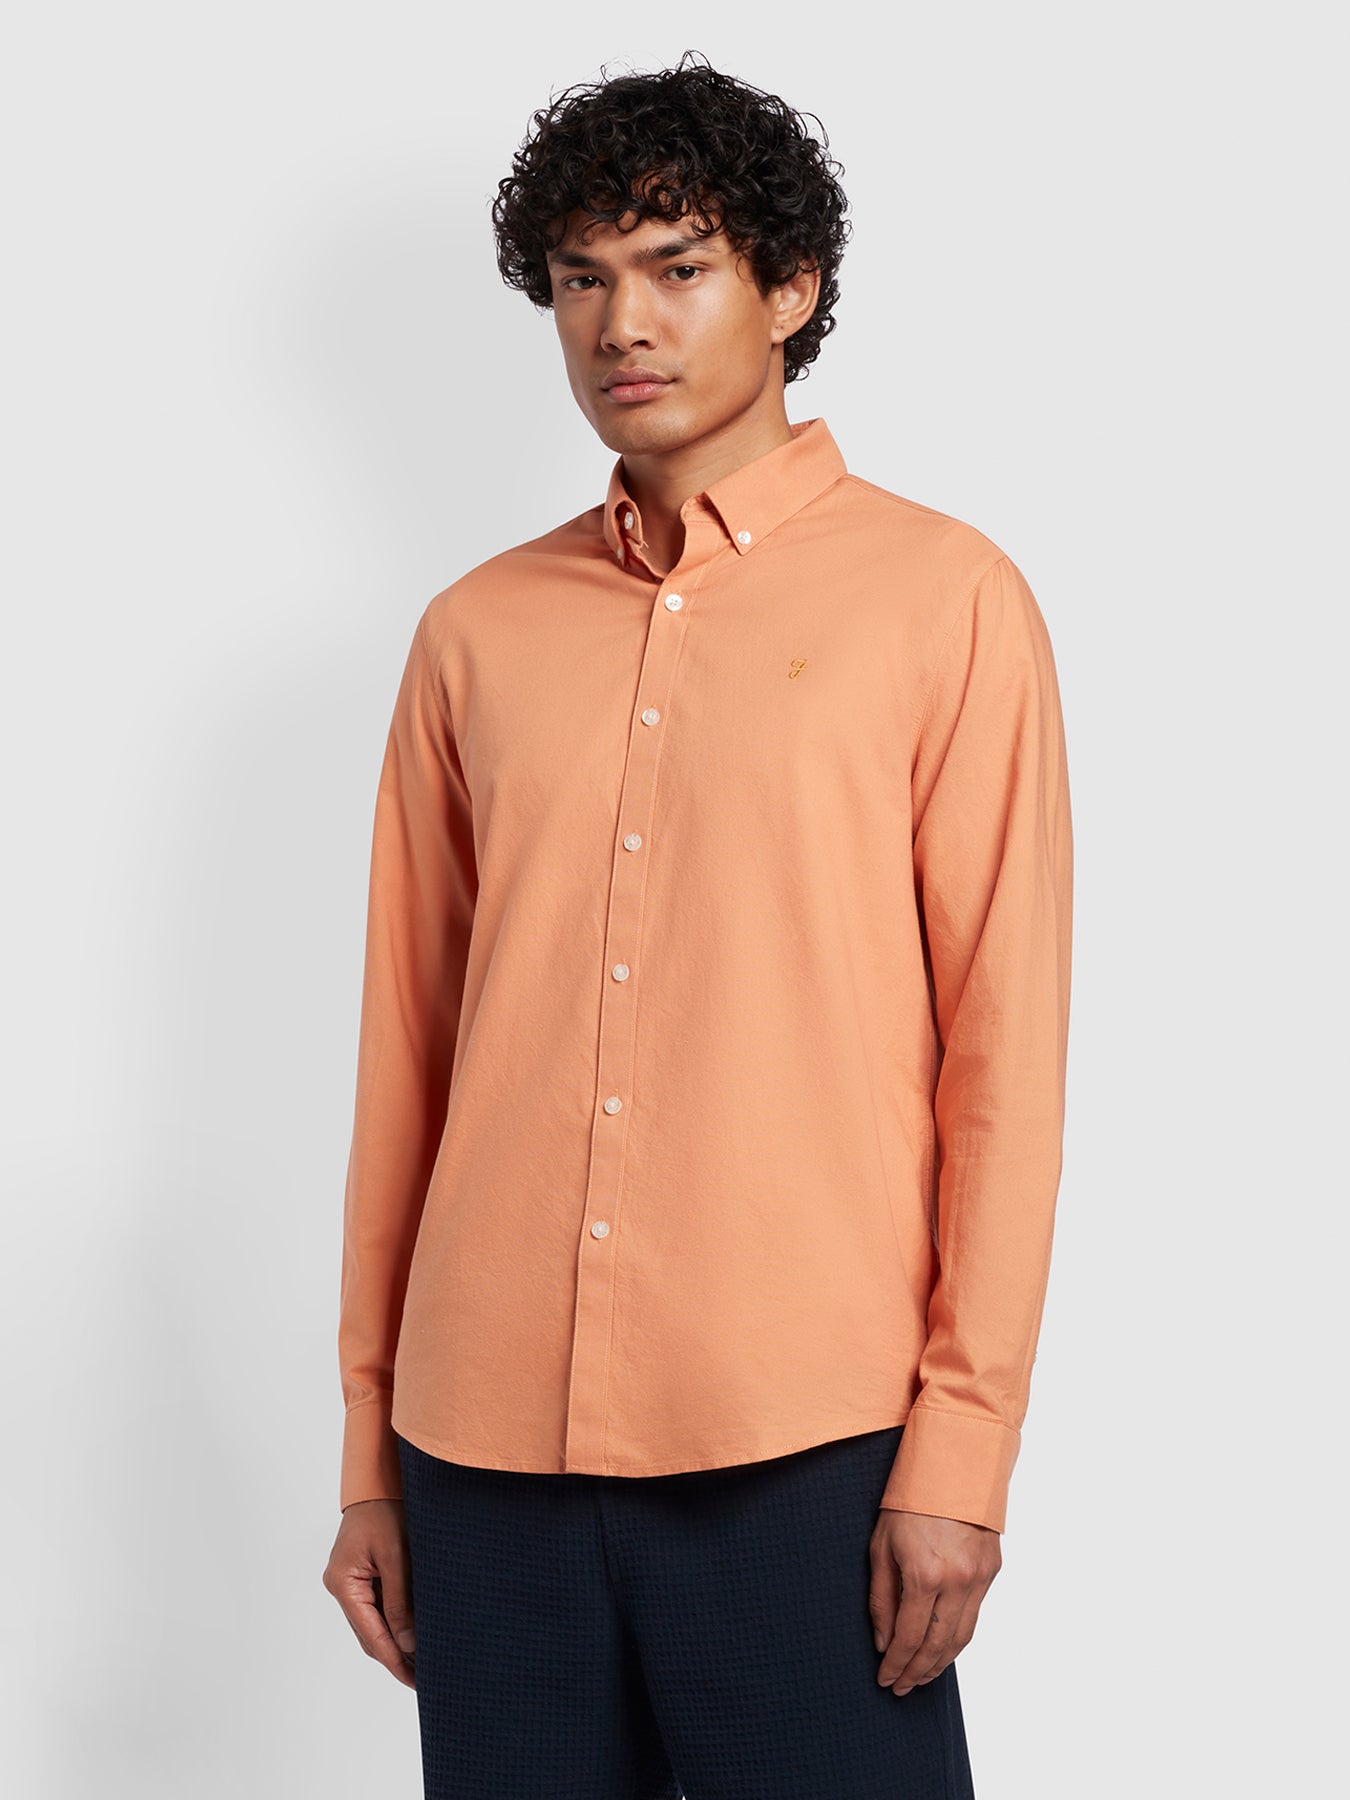 View Brewer Casual Fit Long Sleeve Organic Cotton Oxford Shirt In Mandarin information